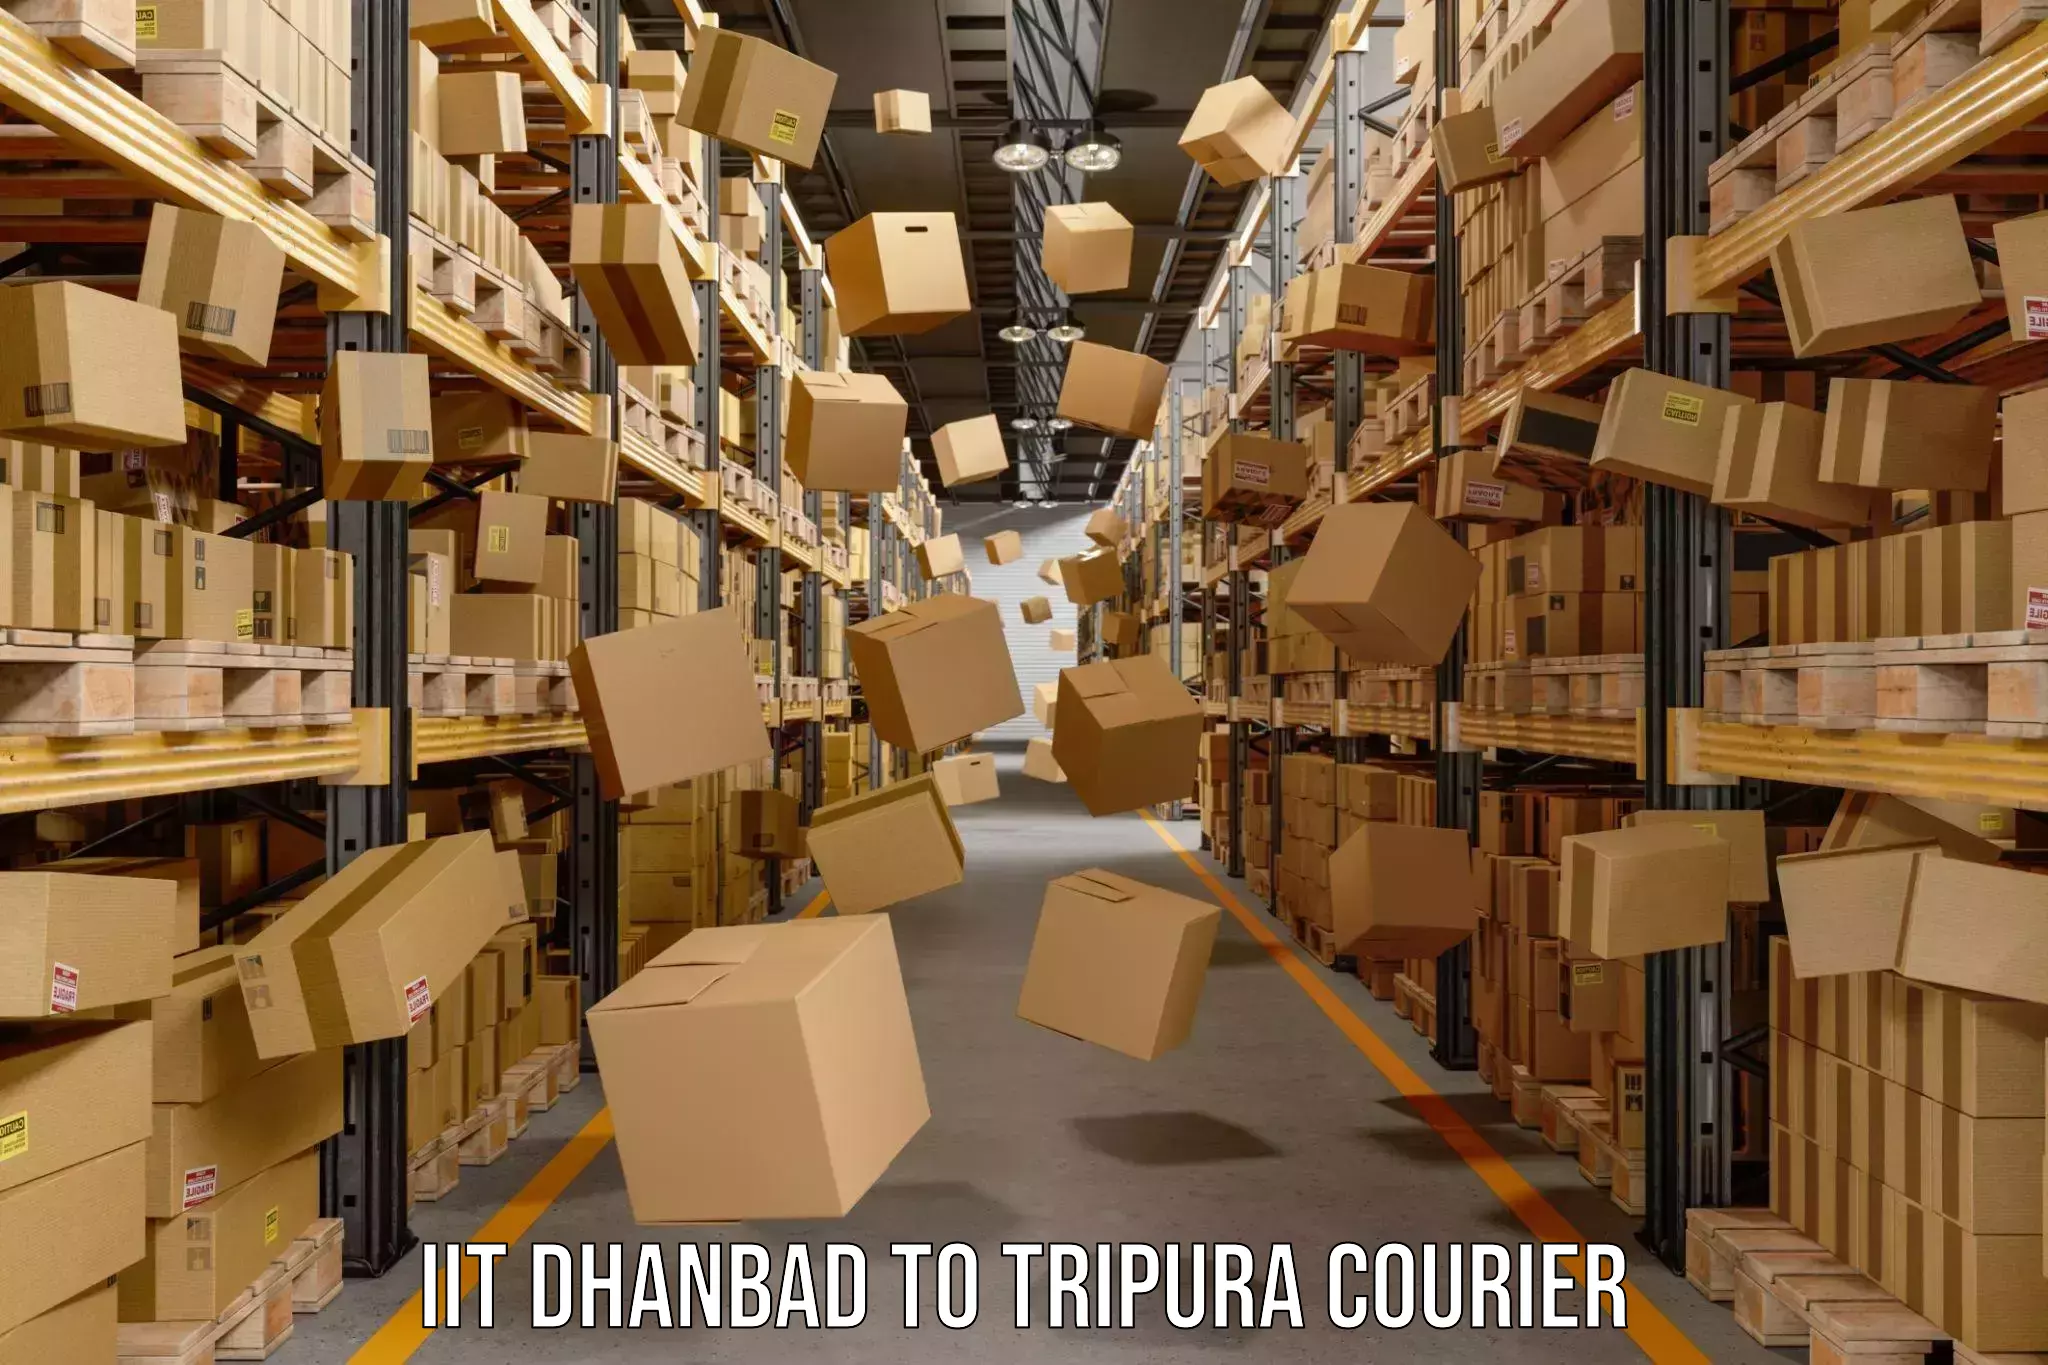 State-of-the-art courier technology IIT Dhanbad to Tripura